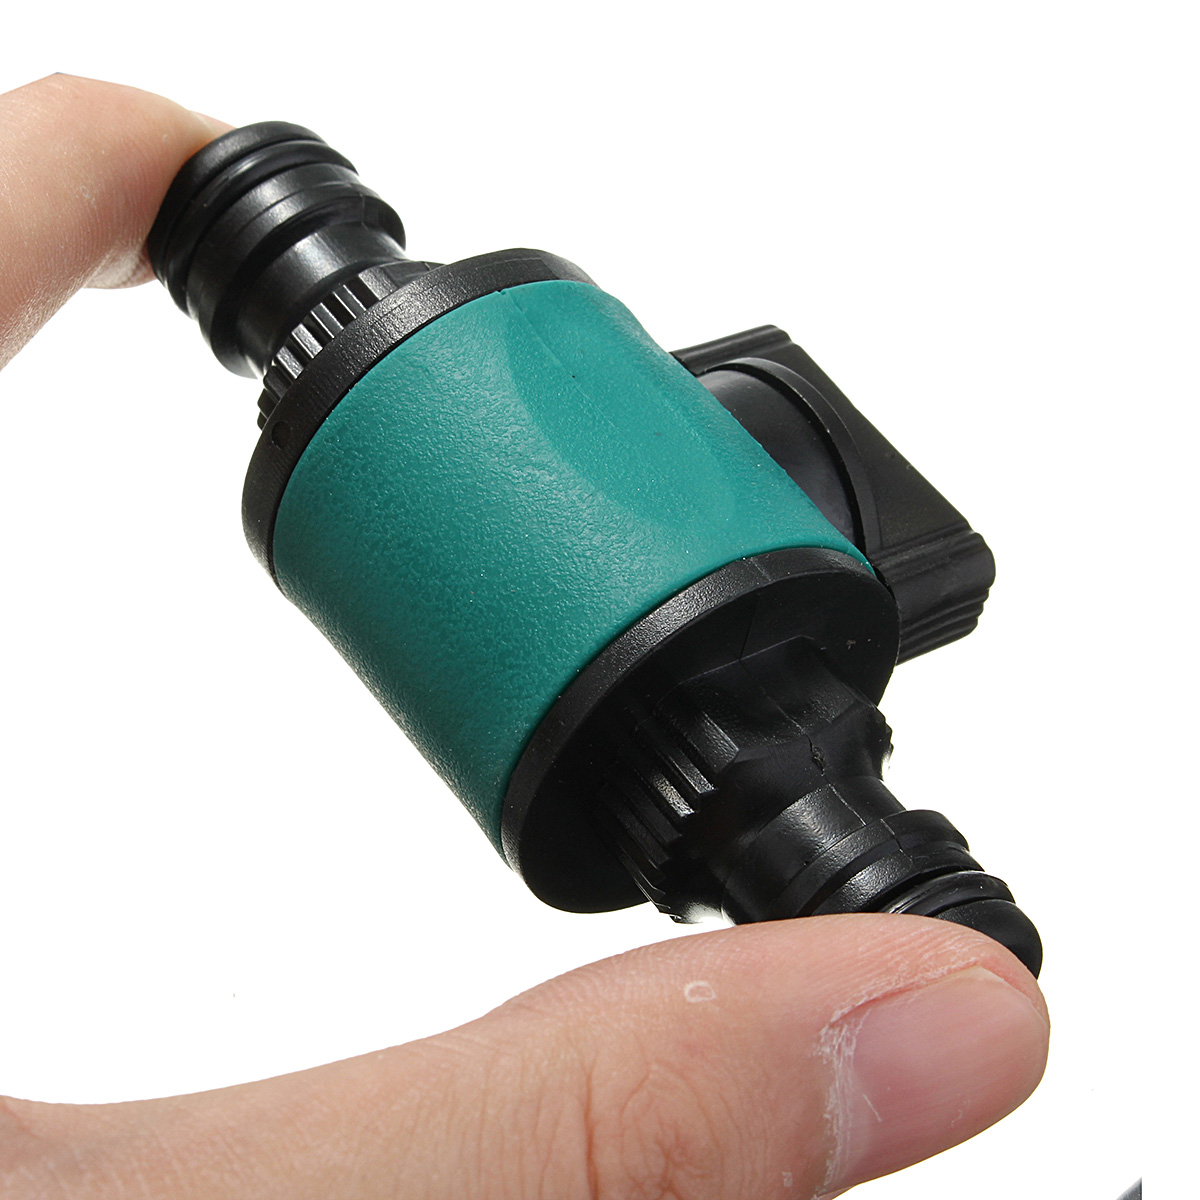 Garden-Hose-Tap-Pipe-Compatible-12-2-Way-Connector-Valve-Convertor-Fitting-Adapter-Tool-1290232-7